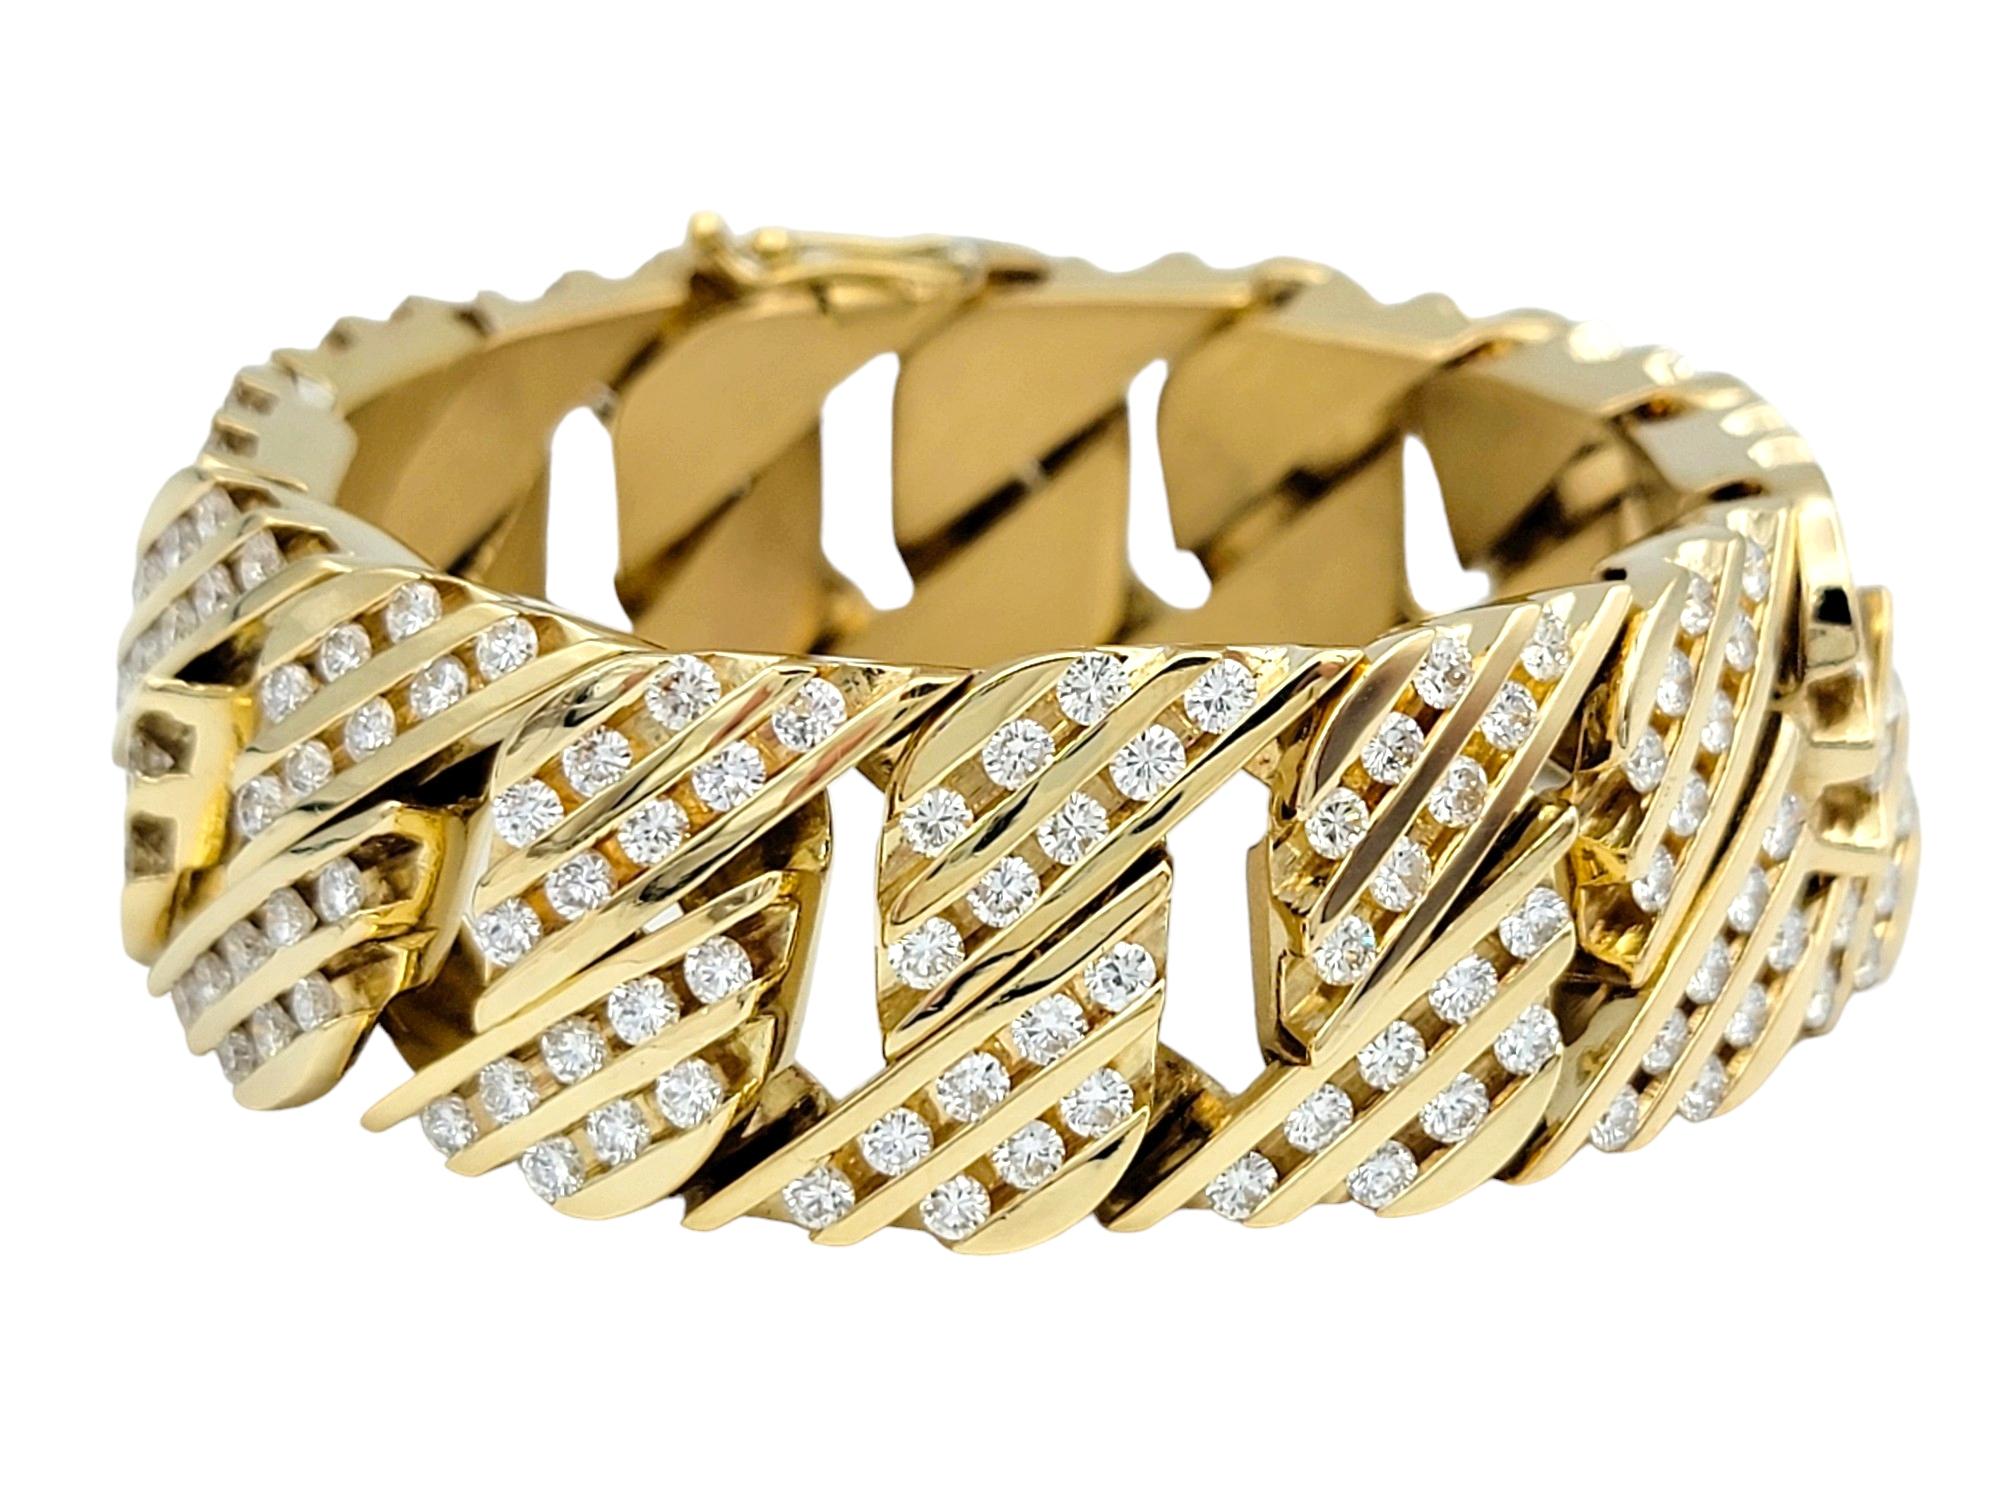 The inner circumference of this bracelet measures 5.75 inches and will comfortably fit up to a 5.5 inch wrist. 

This bold Miami cuban link bracelet boasts a striking design set in luxurious 14 karat yellow gold. Each link of the bracelet is